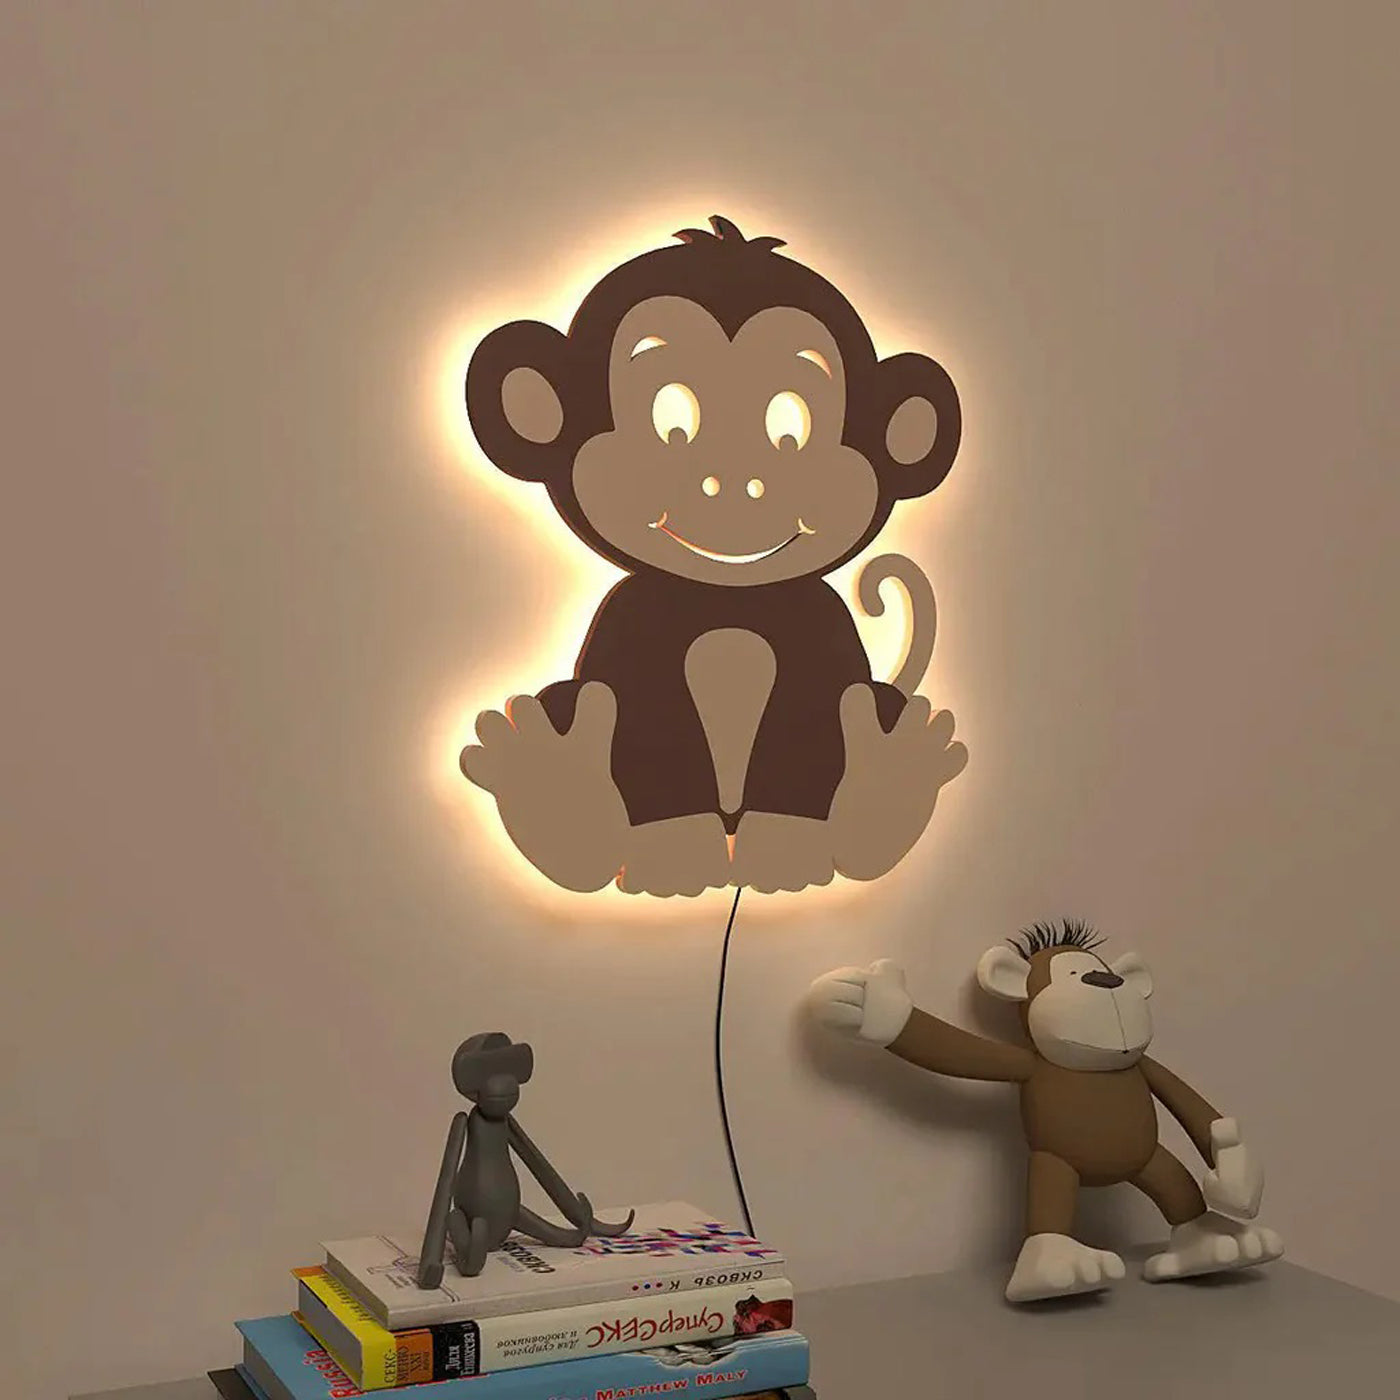 Cheerful Baby Monkey Wooden Decorative Backlit for Kids Room Décor